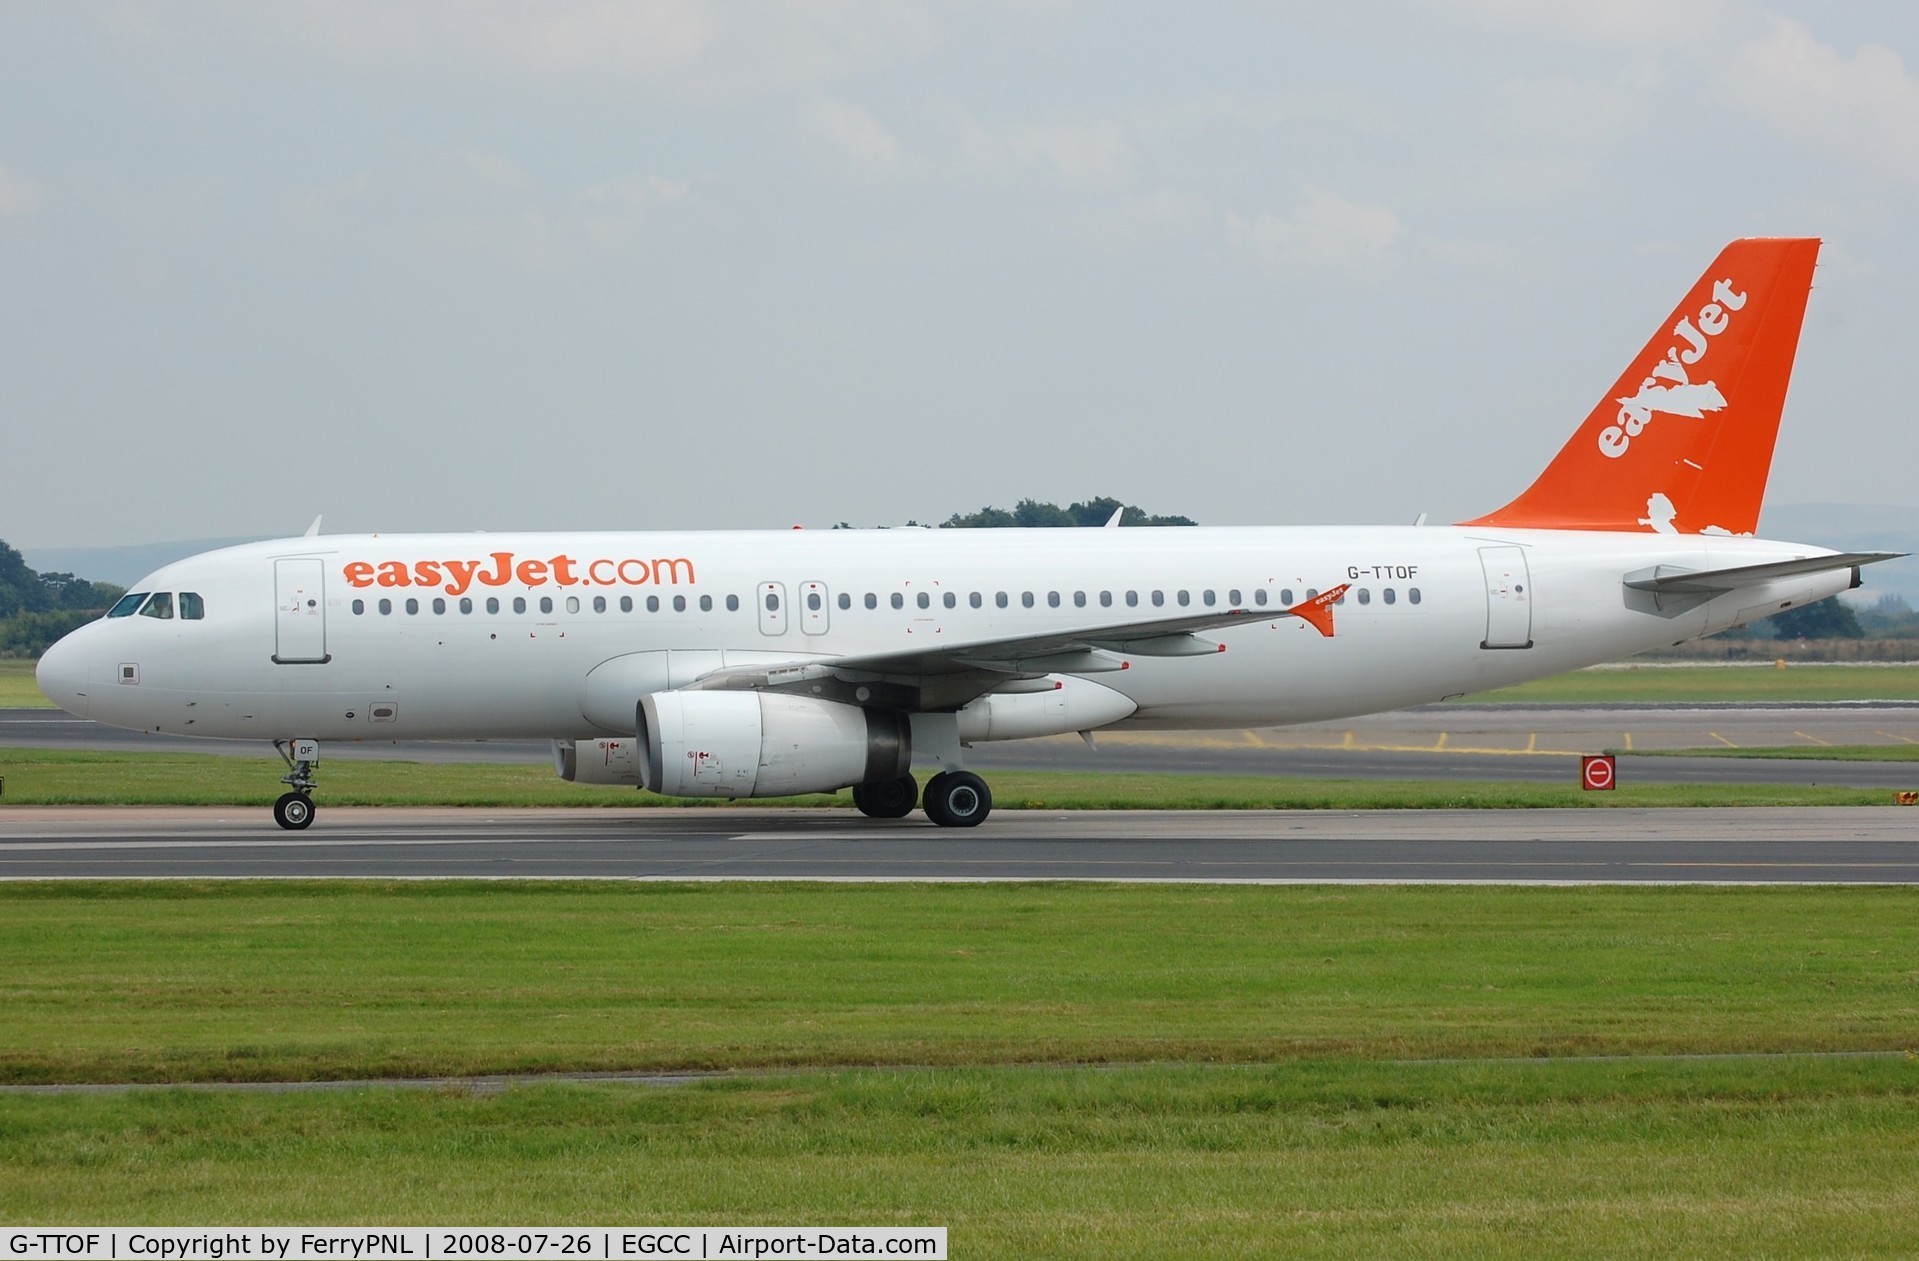 G-TTOF, 2002 Airbus A320-232 C/N 1918, Easyjet A320. Stickers were probably as cheap as their flights.